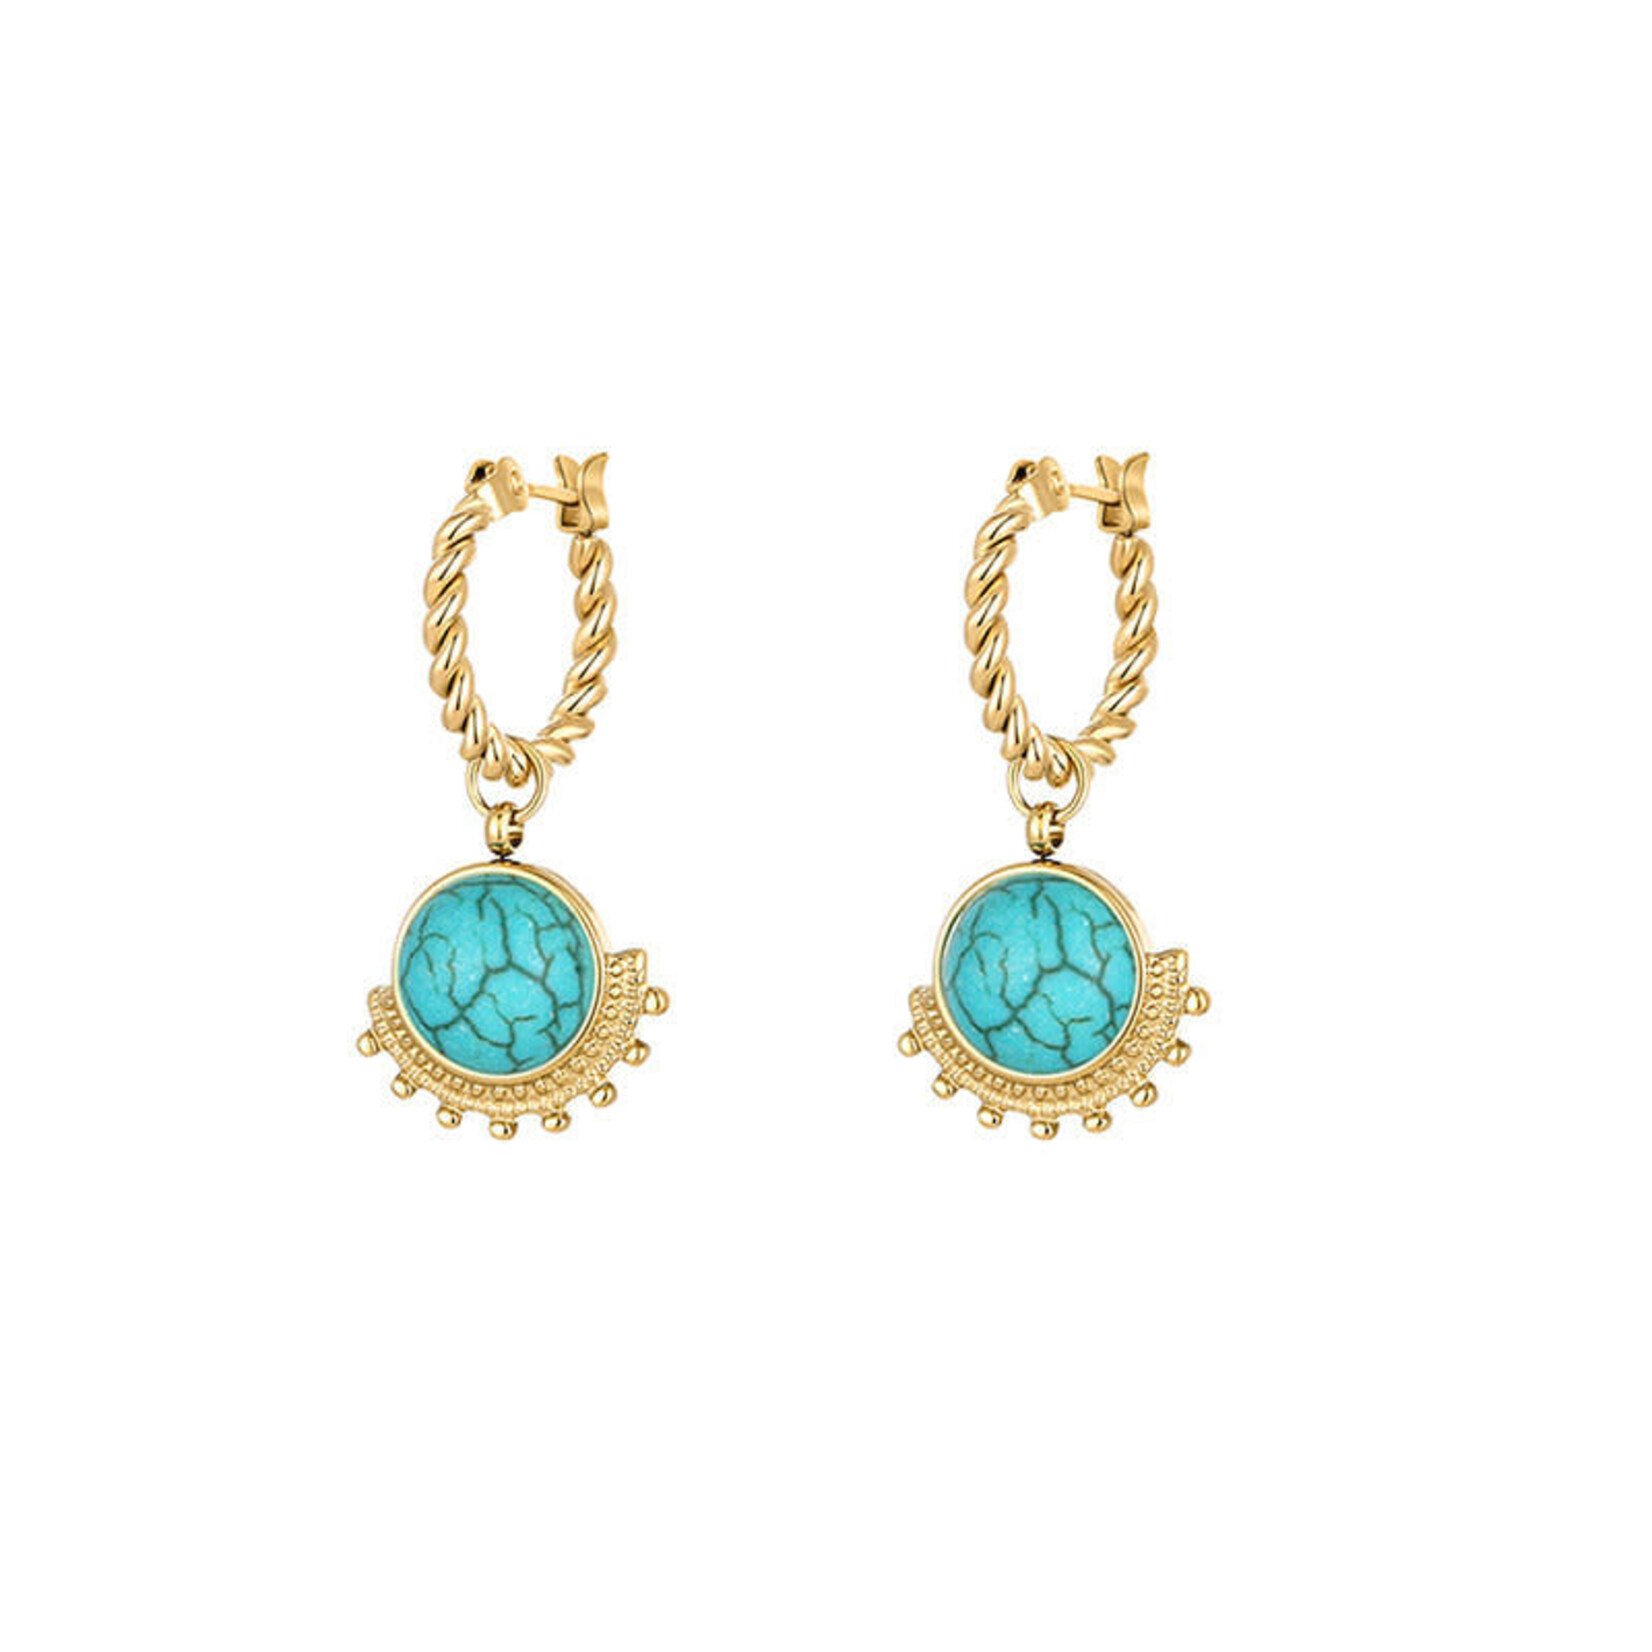 Just East Gold with Aqua Stone Round Hoop Earrings